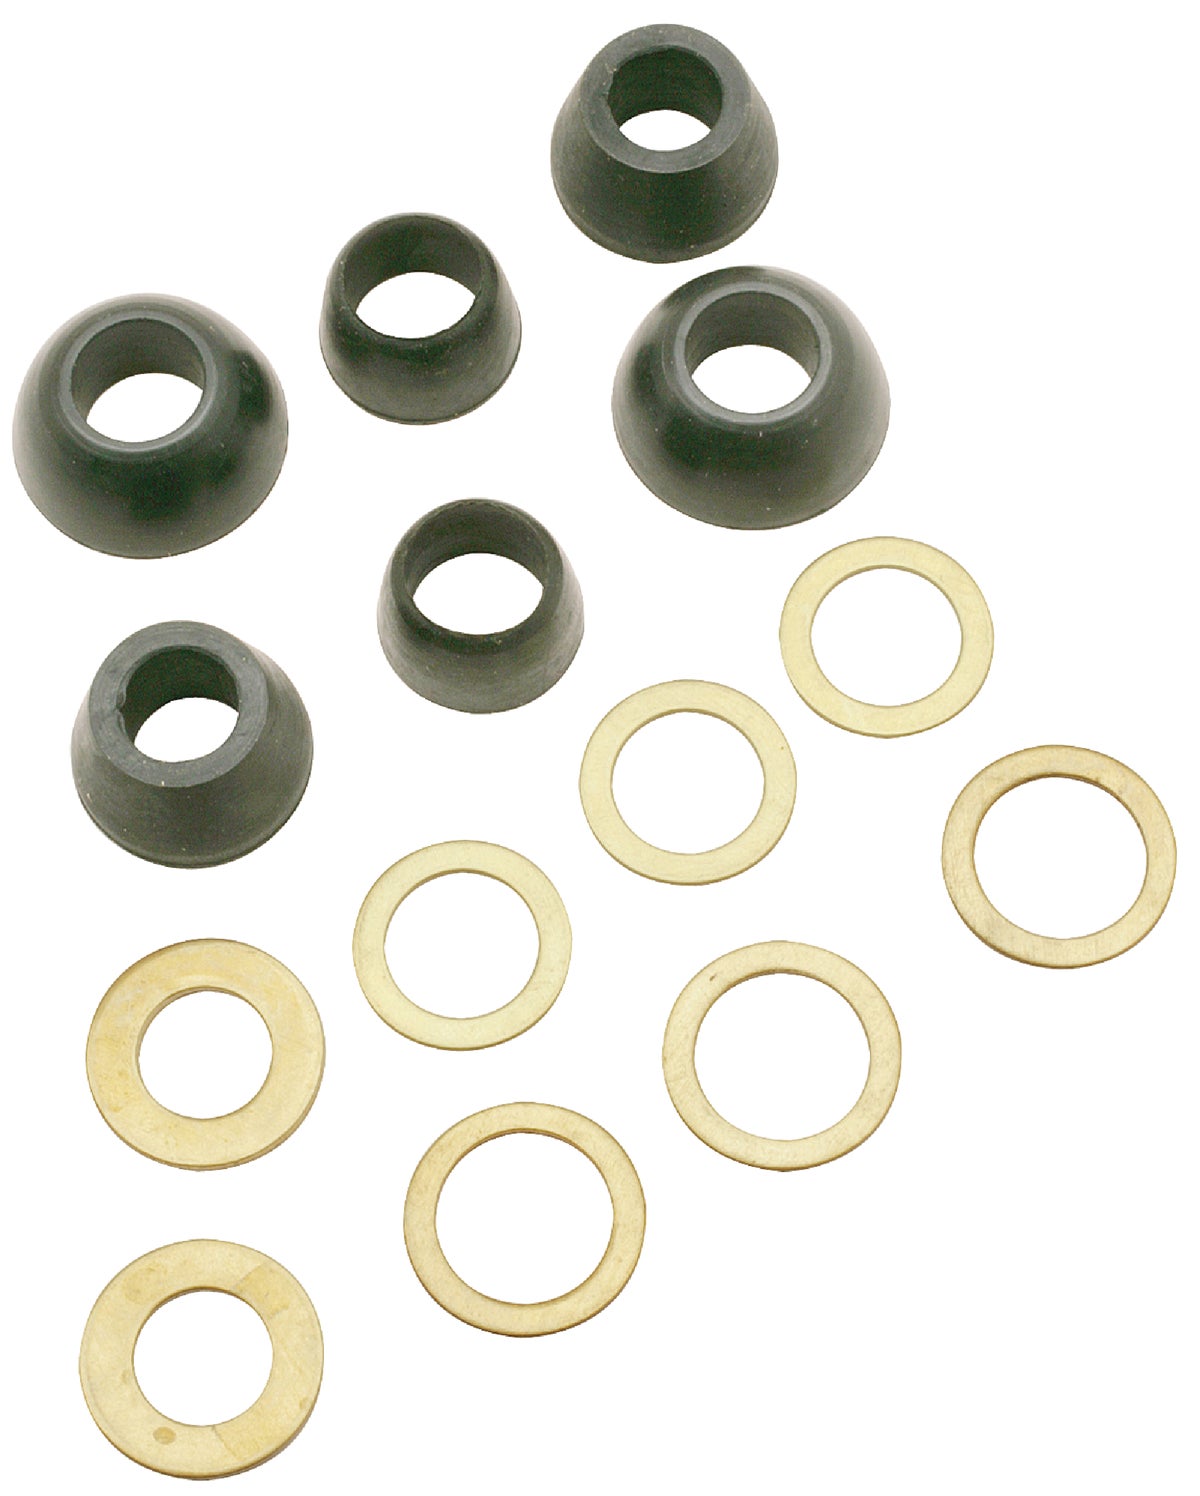 3/8” Rubber Cone Slip Joint Washers W/ Friction Rings 36-109 Pack of 20 